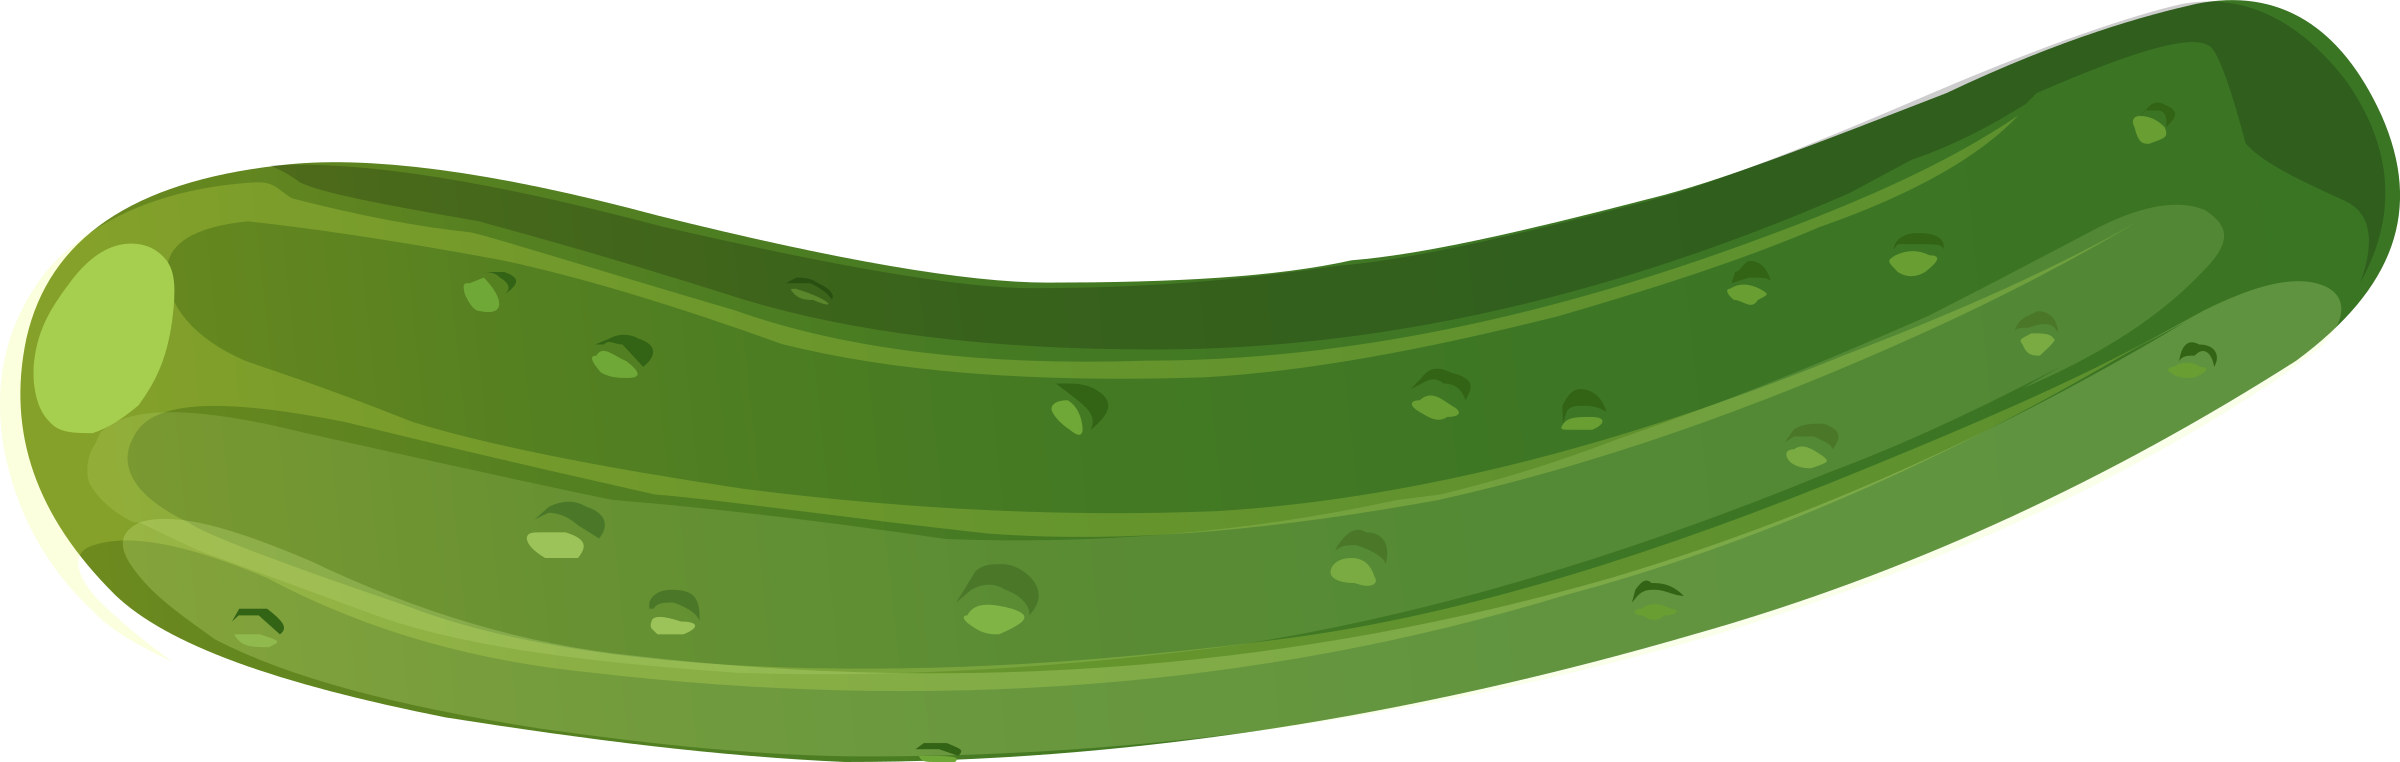 Zucchini clipart small. Courgette big image png